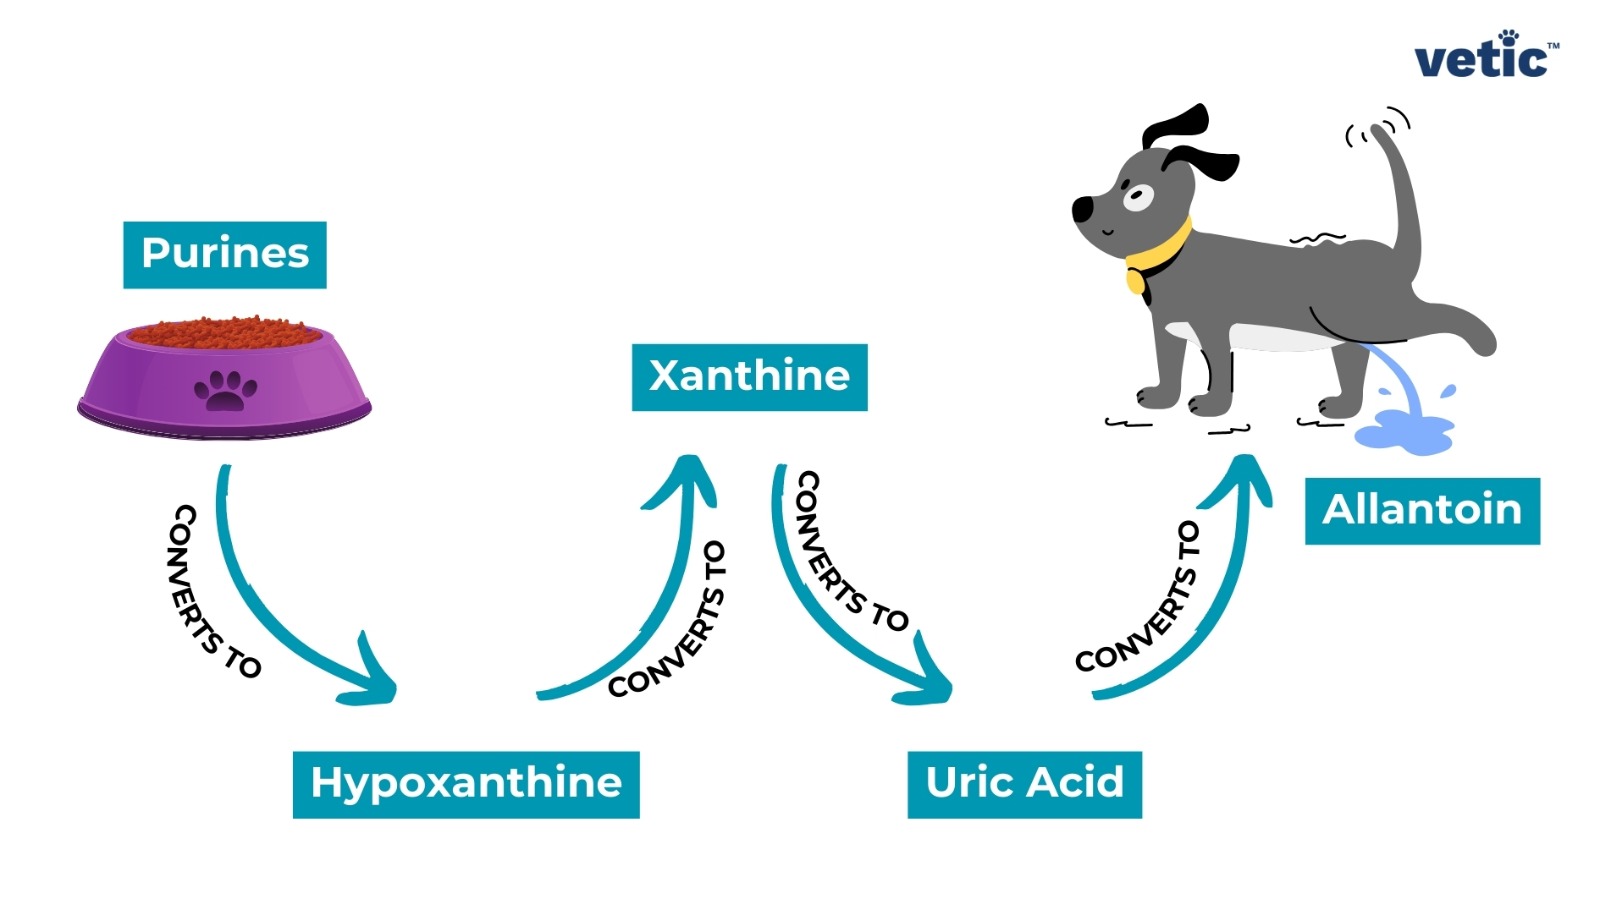 The image is an infographic on Uroliths in Dalmatians; explaining the metabolic process of converting purines to uric acid in dogs. On the left, there is a purple bowl filled with dog food labeled “Purines.” Arrows labeled “CONVERTS TO” show the conversion process from purines to hypoxanthine, then to xanthine, and then to uric acid, which is finally converted to Allantoin. “Hypoxanthine” and “Xanthine” are written in blue text boxes connected by arrows indicating their conversion sequence. On the right side of the image, there’s a cartoon depiction of a grey dog with a yellow collar. The dog appears to be peeing, representing the excretion of uric acid.